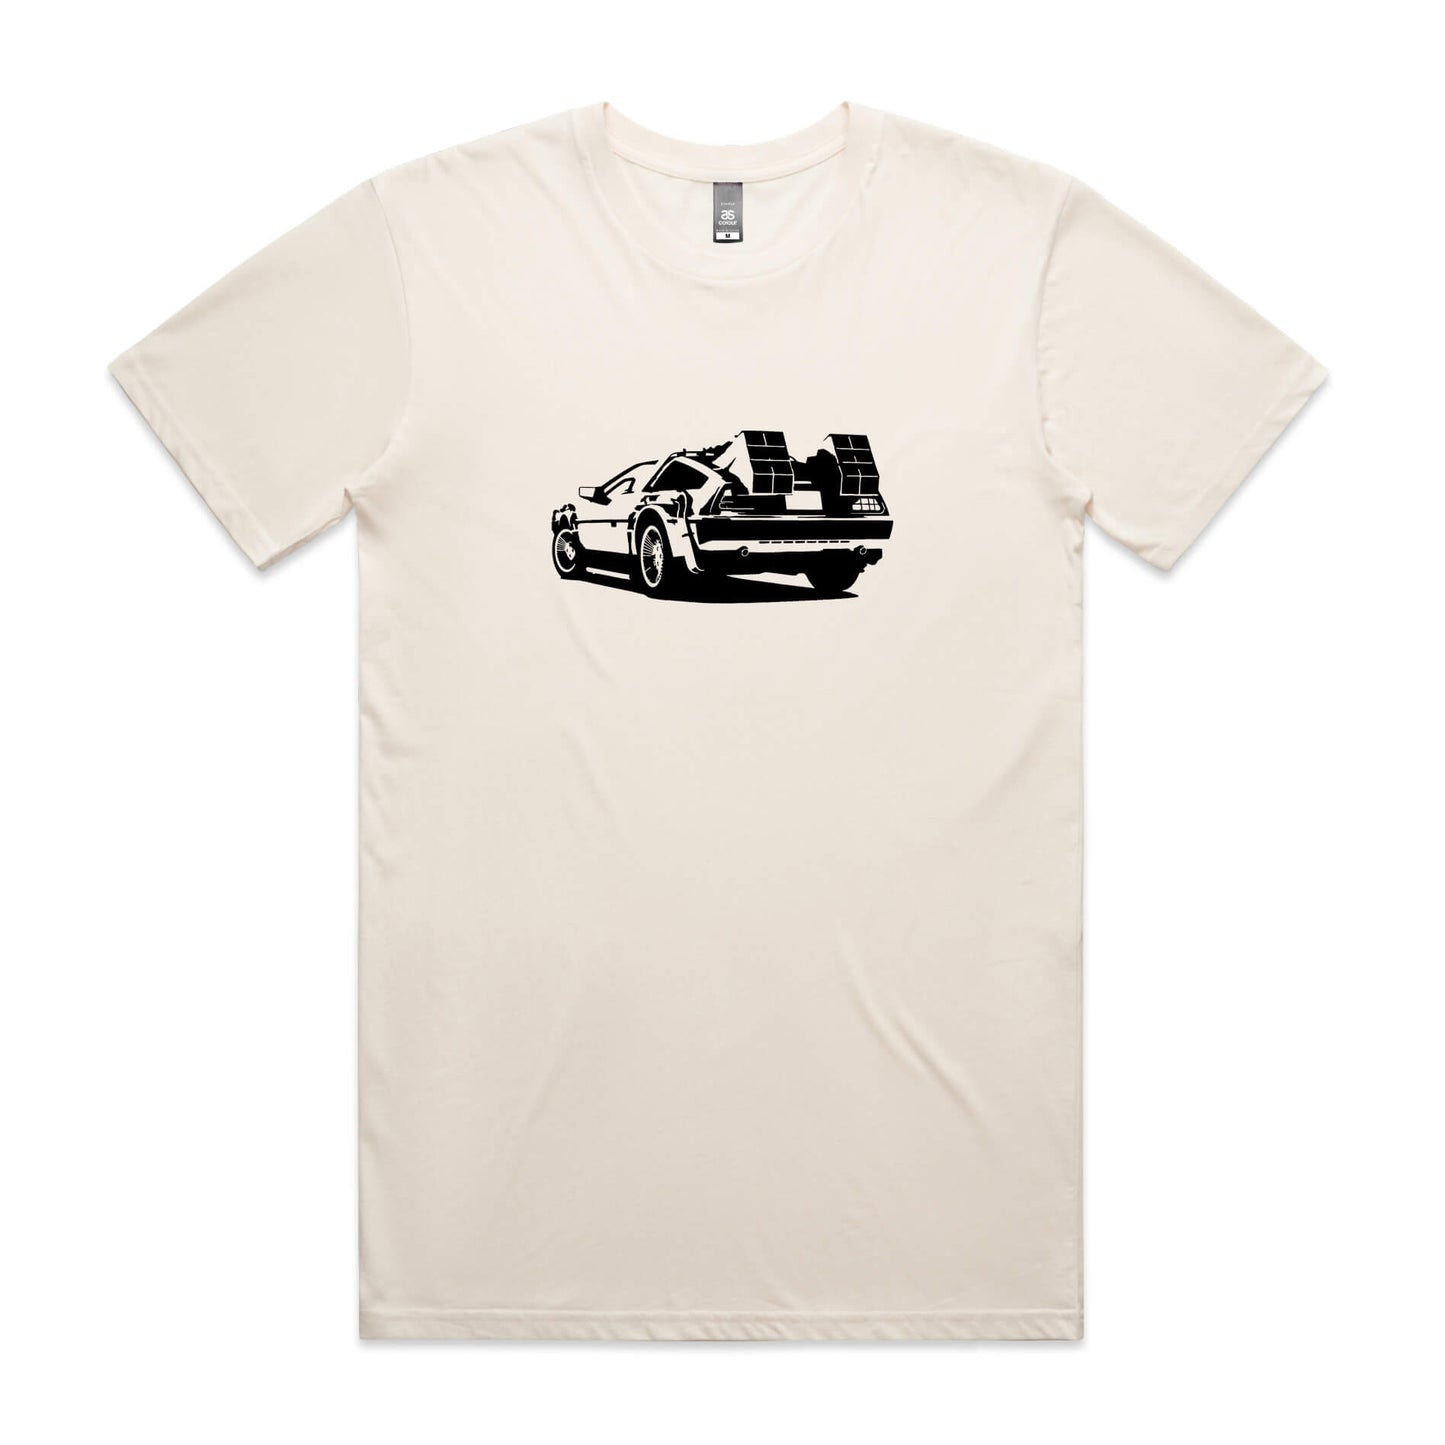 DeLorean Outatime t-shirt in beige with black time machine car graphic